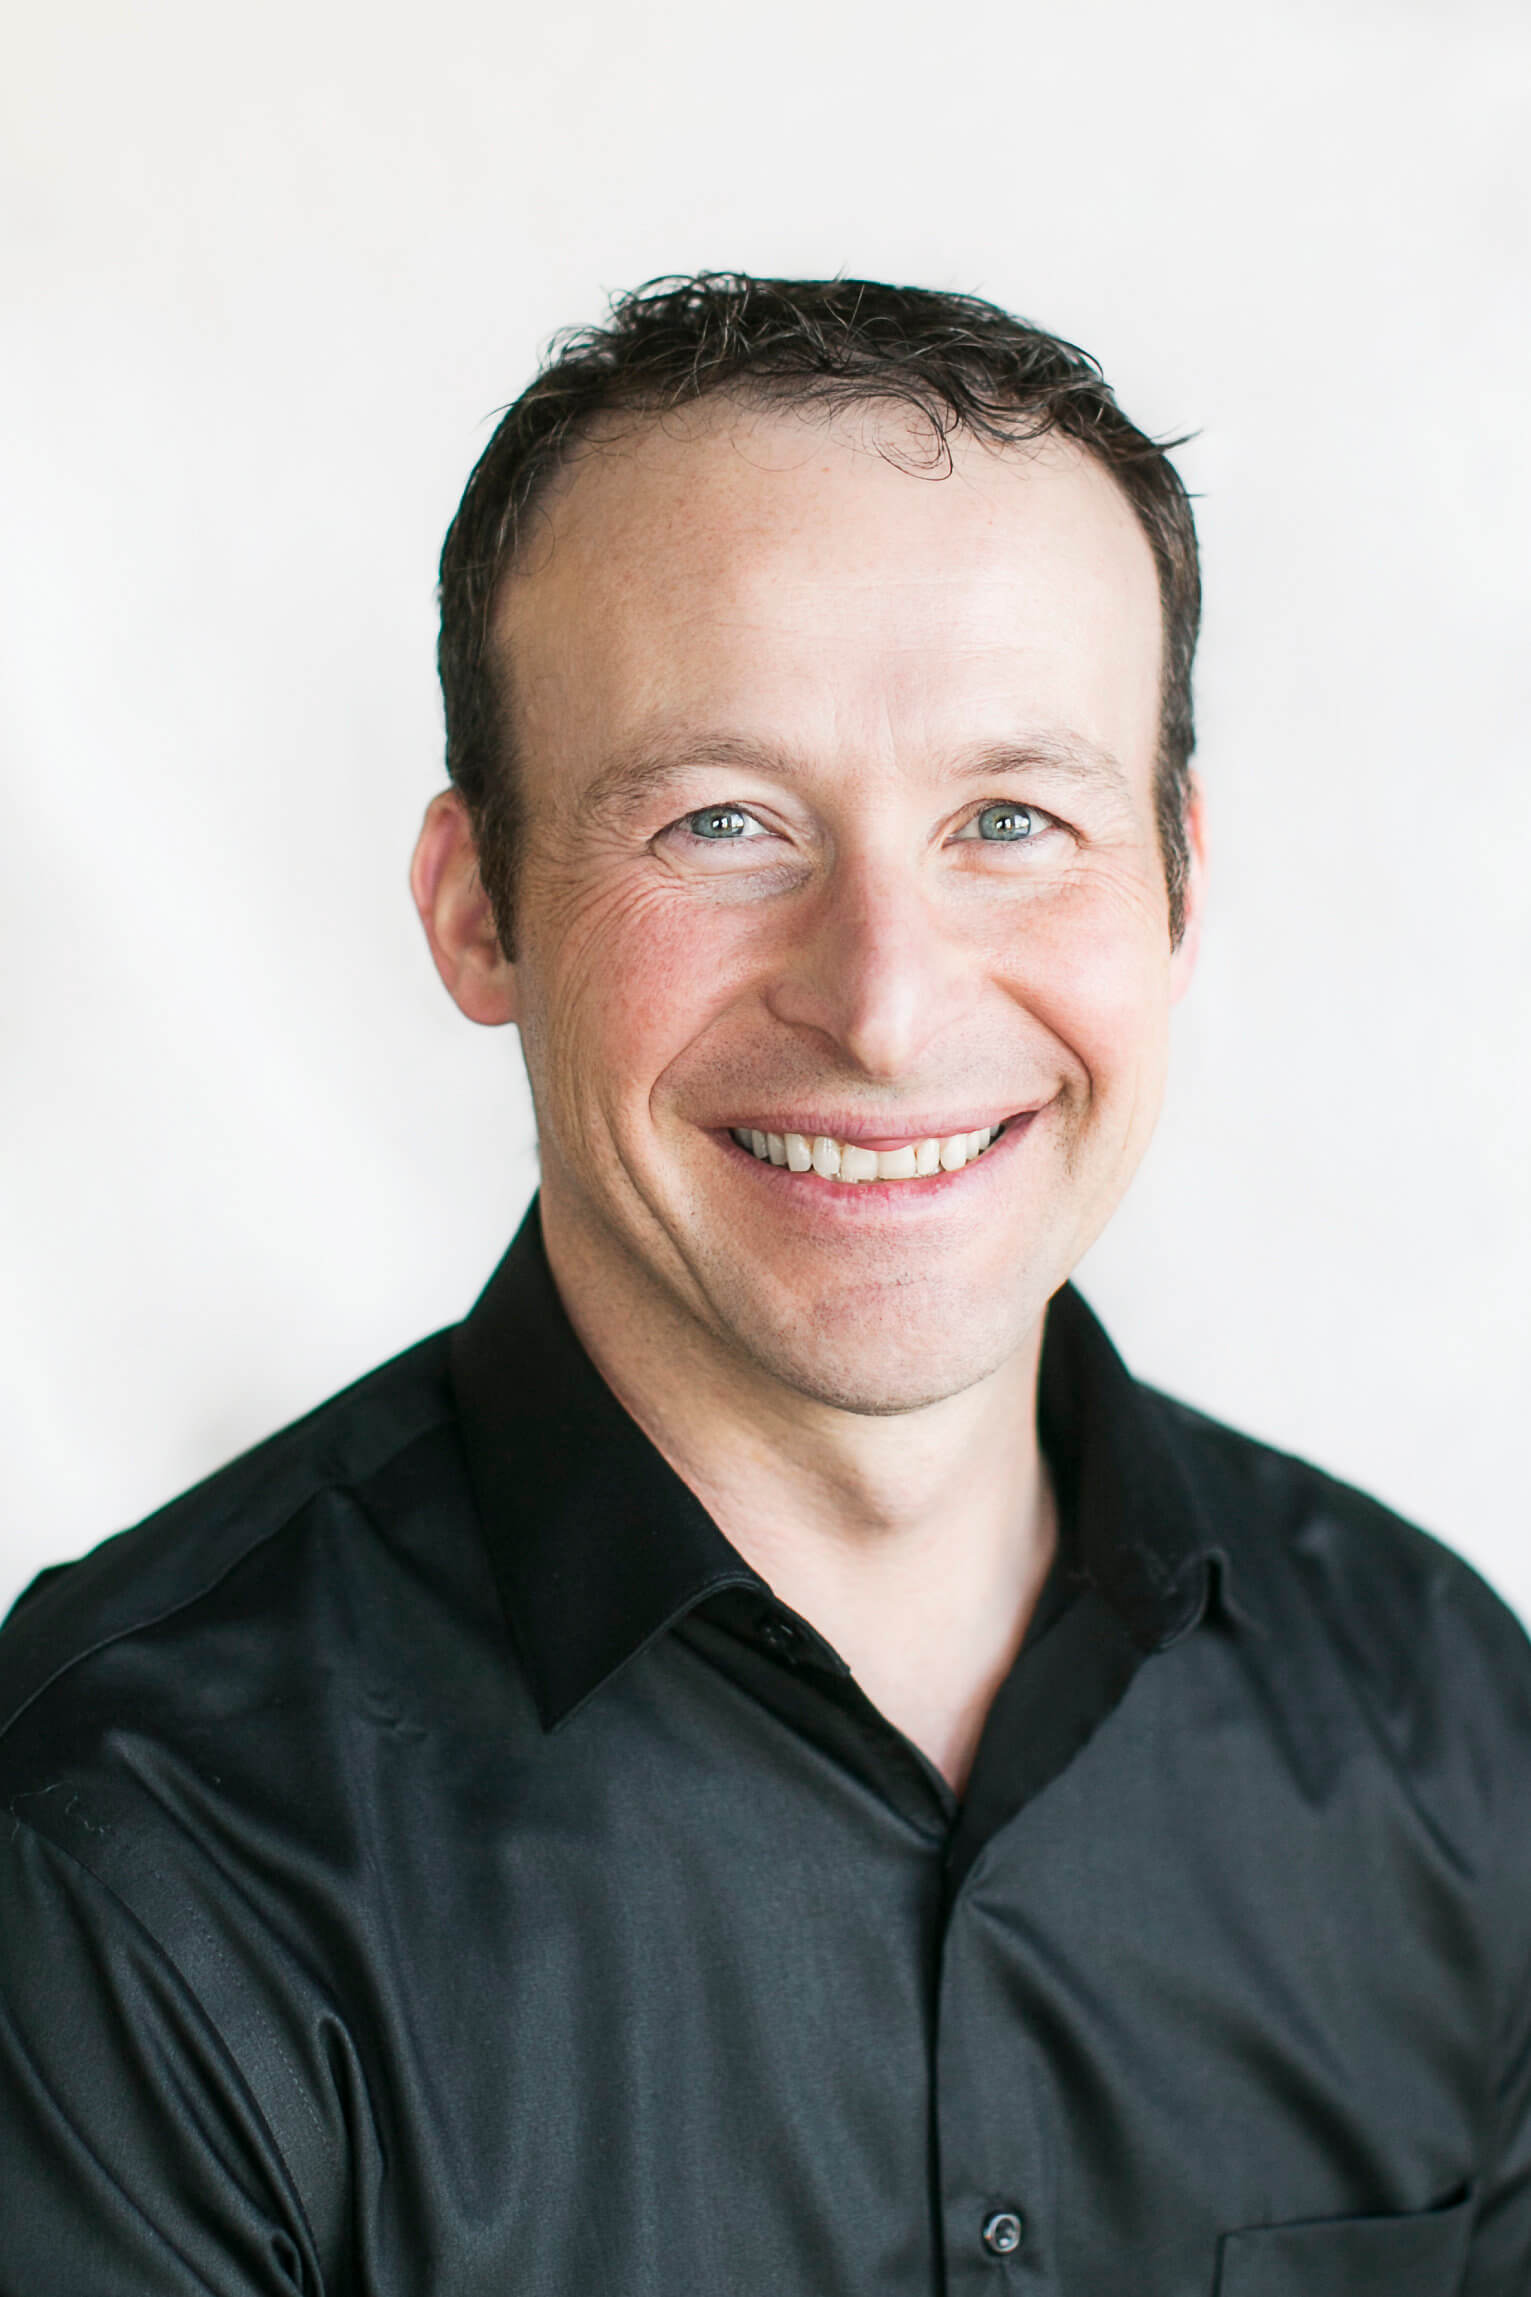 A headshot of Jeff Jensen, Burley Physical Therapy assistant.